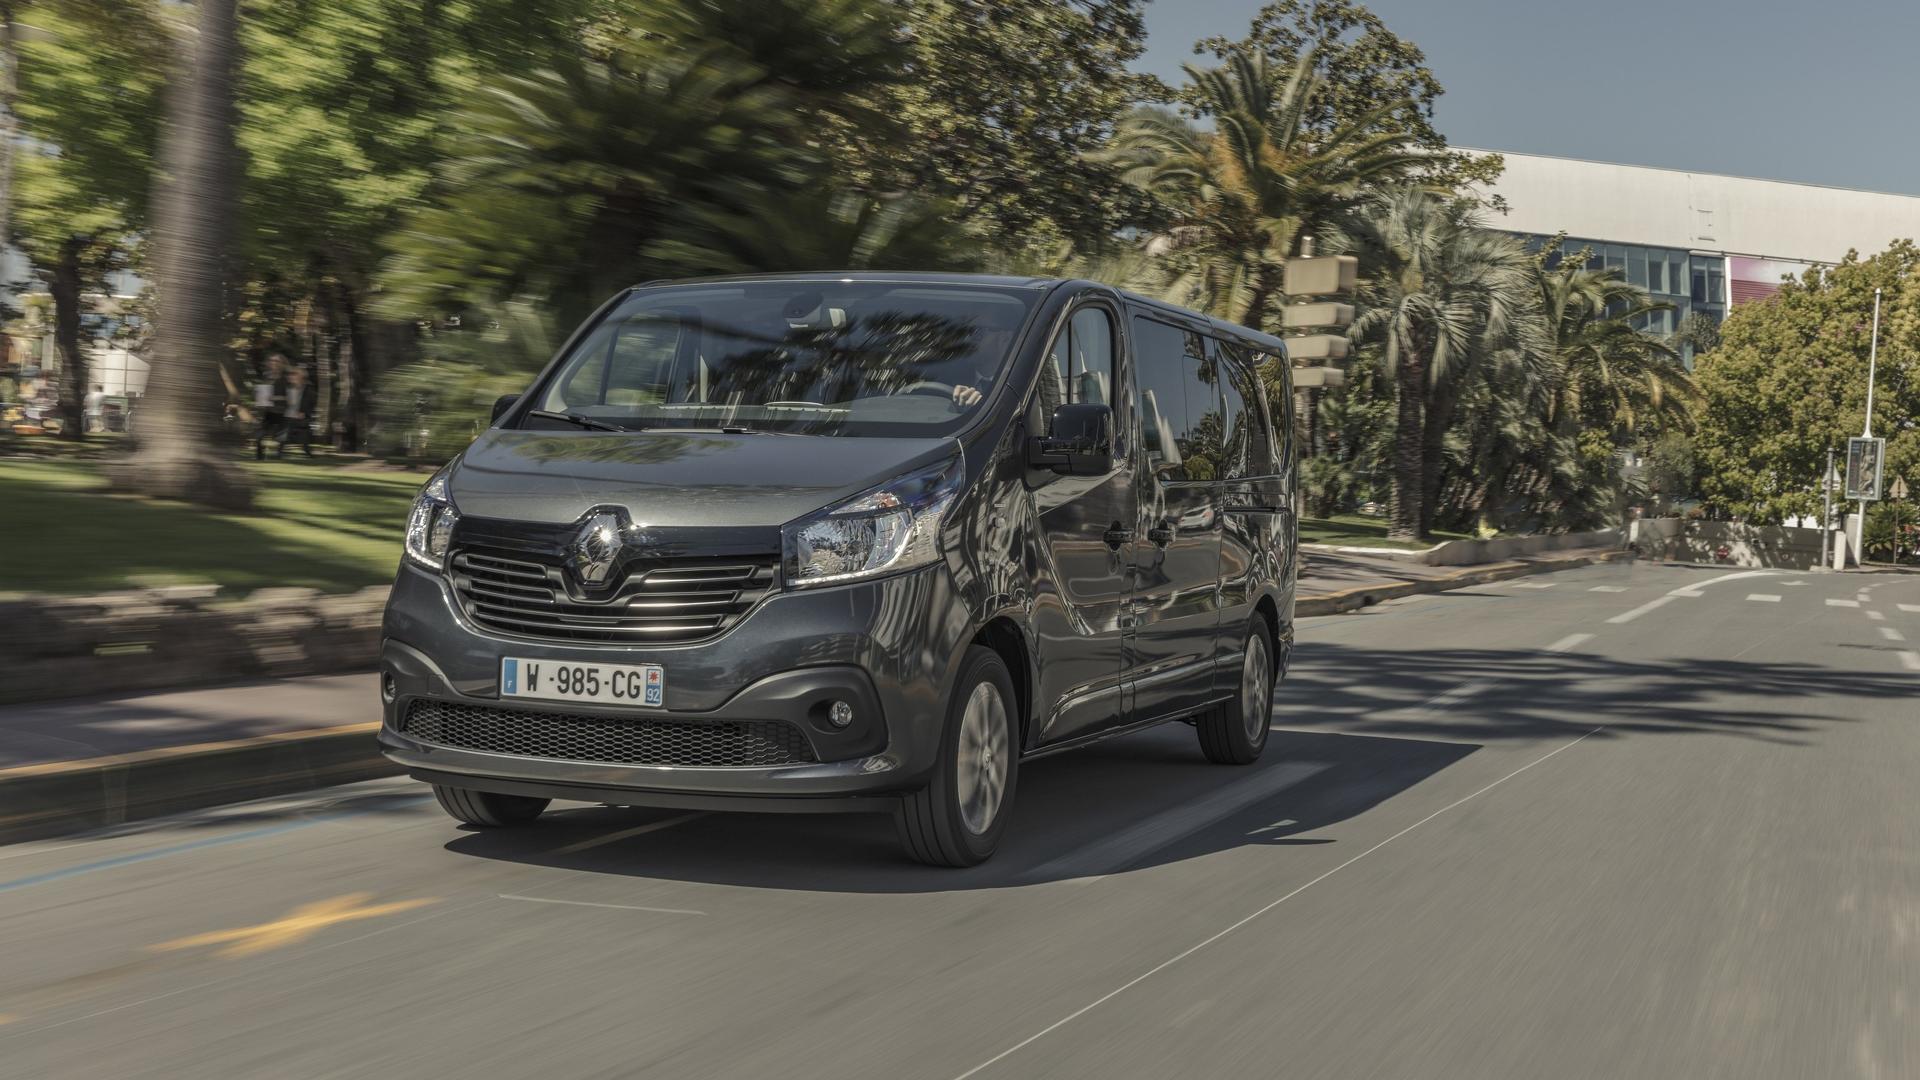 Renault-Trafic-Spaceclass-4